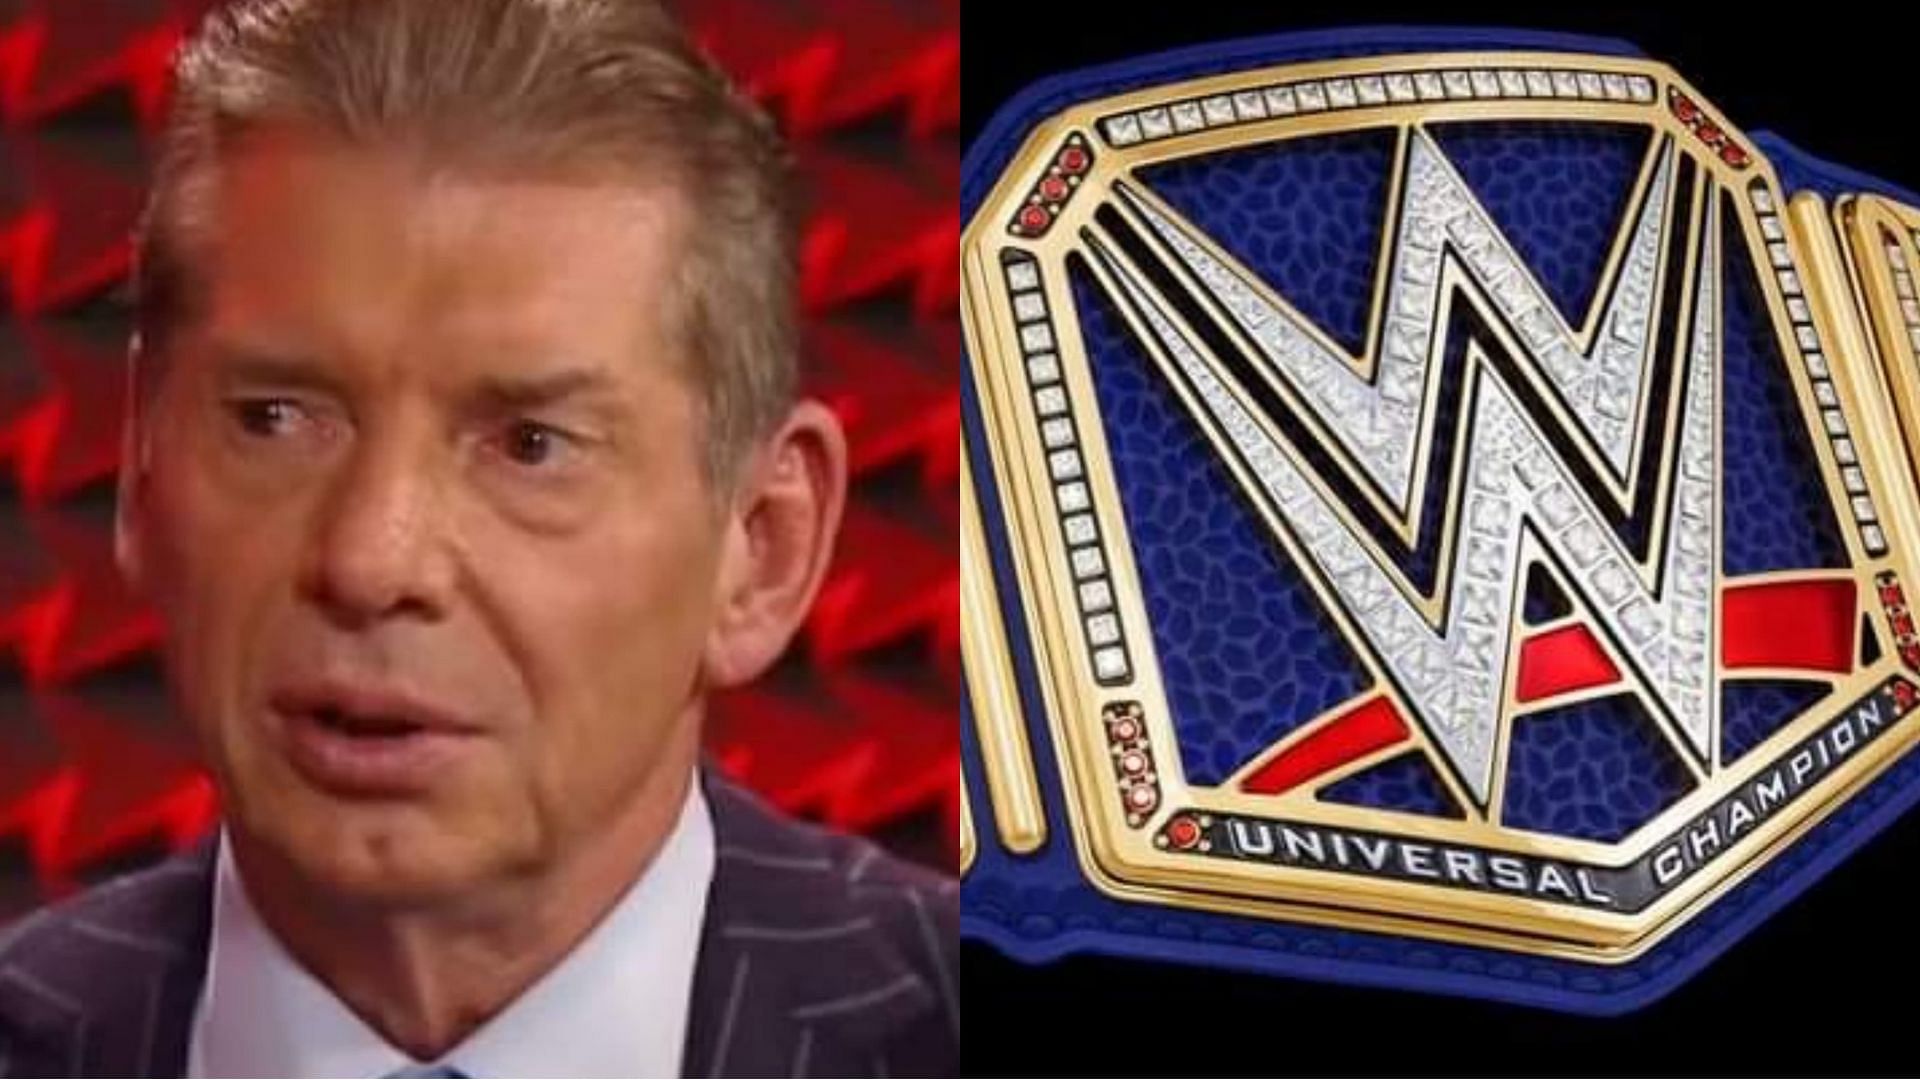 Vince McMahon recently retired as WWE Chairman